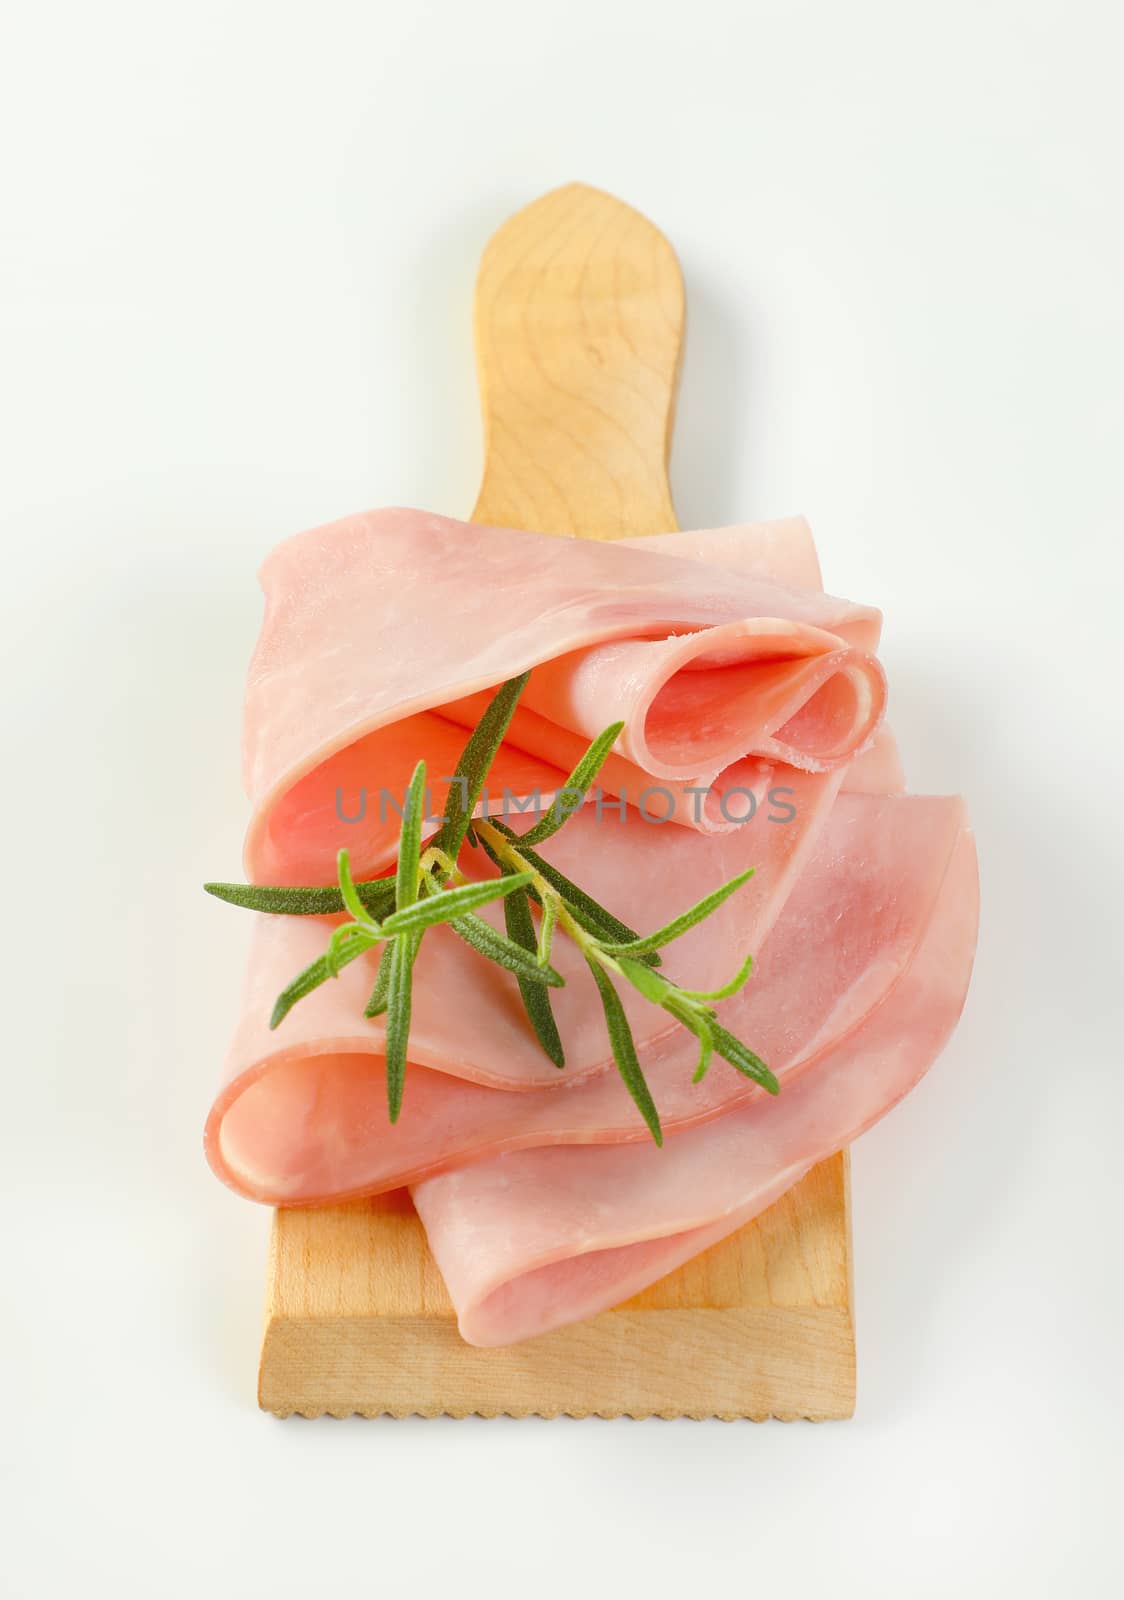 thin slices of ham and rosemary by Digifoodstock